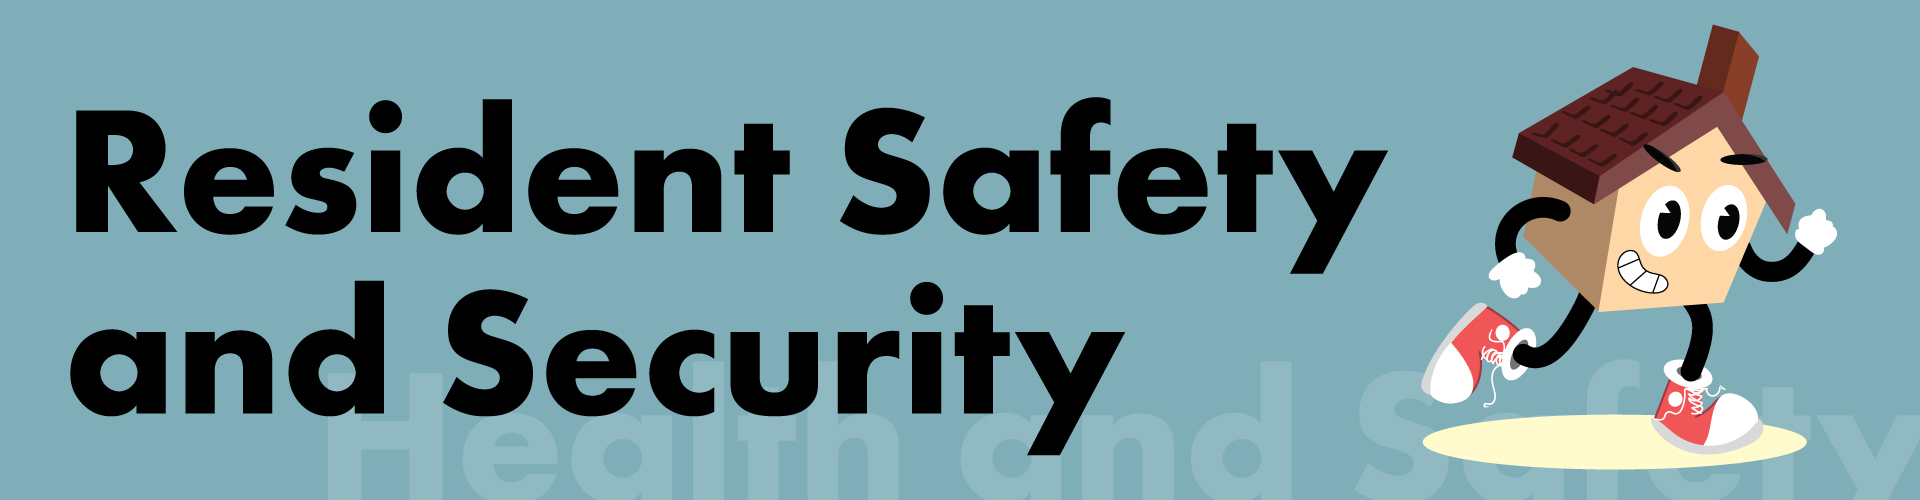 Resident Safety and Security